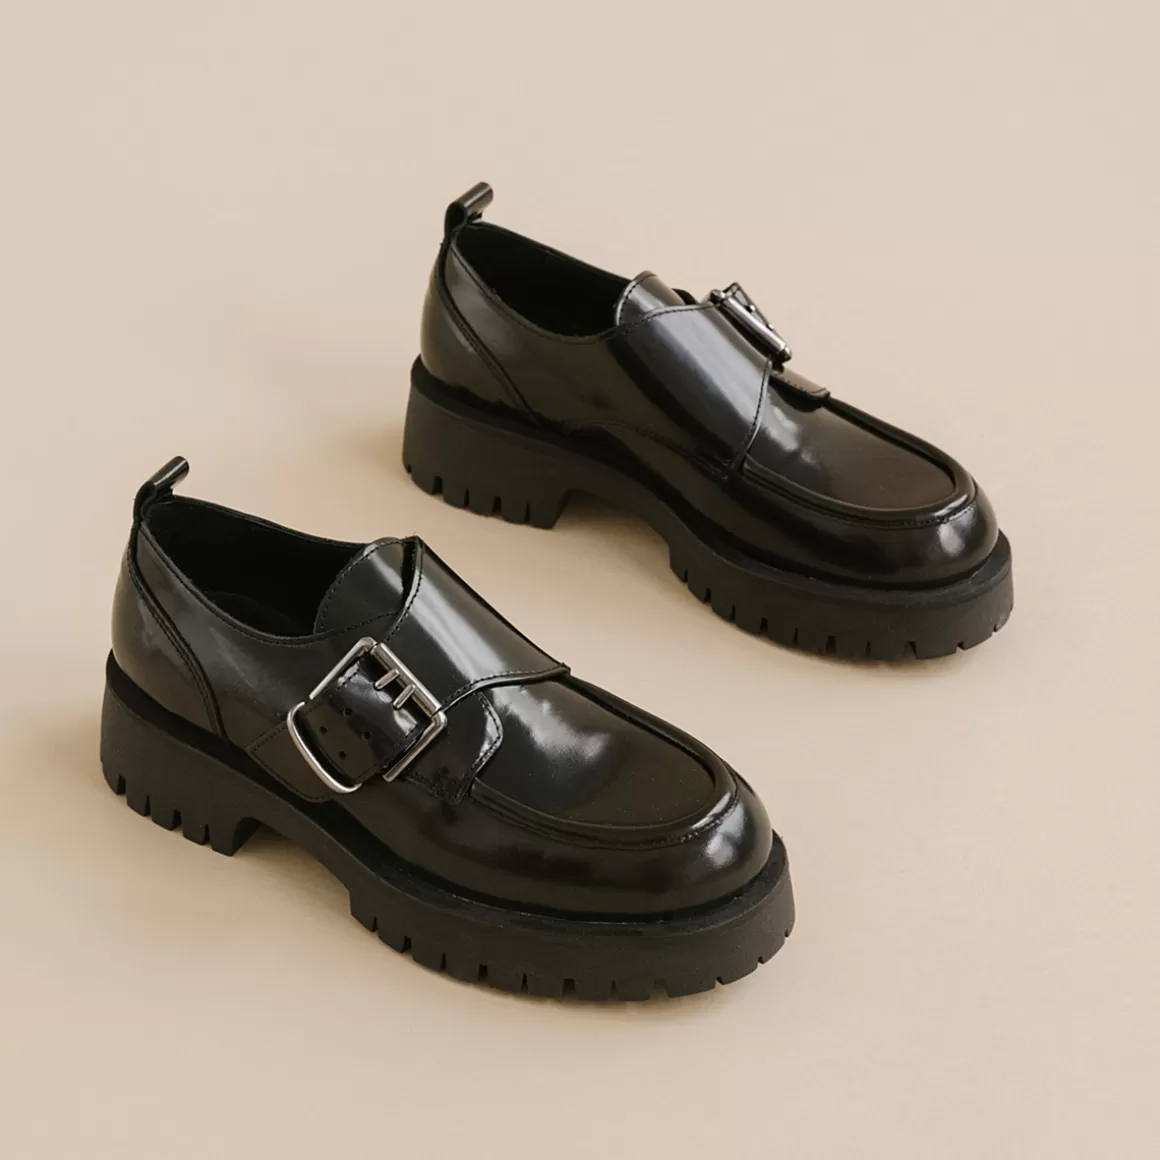 Derbies with flat heels, buckles and visible seams<Jonak Outlet